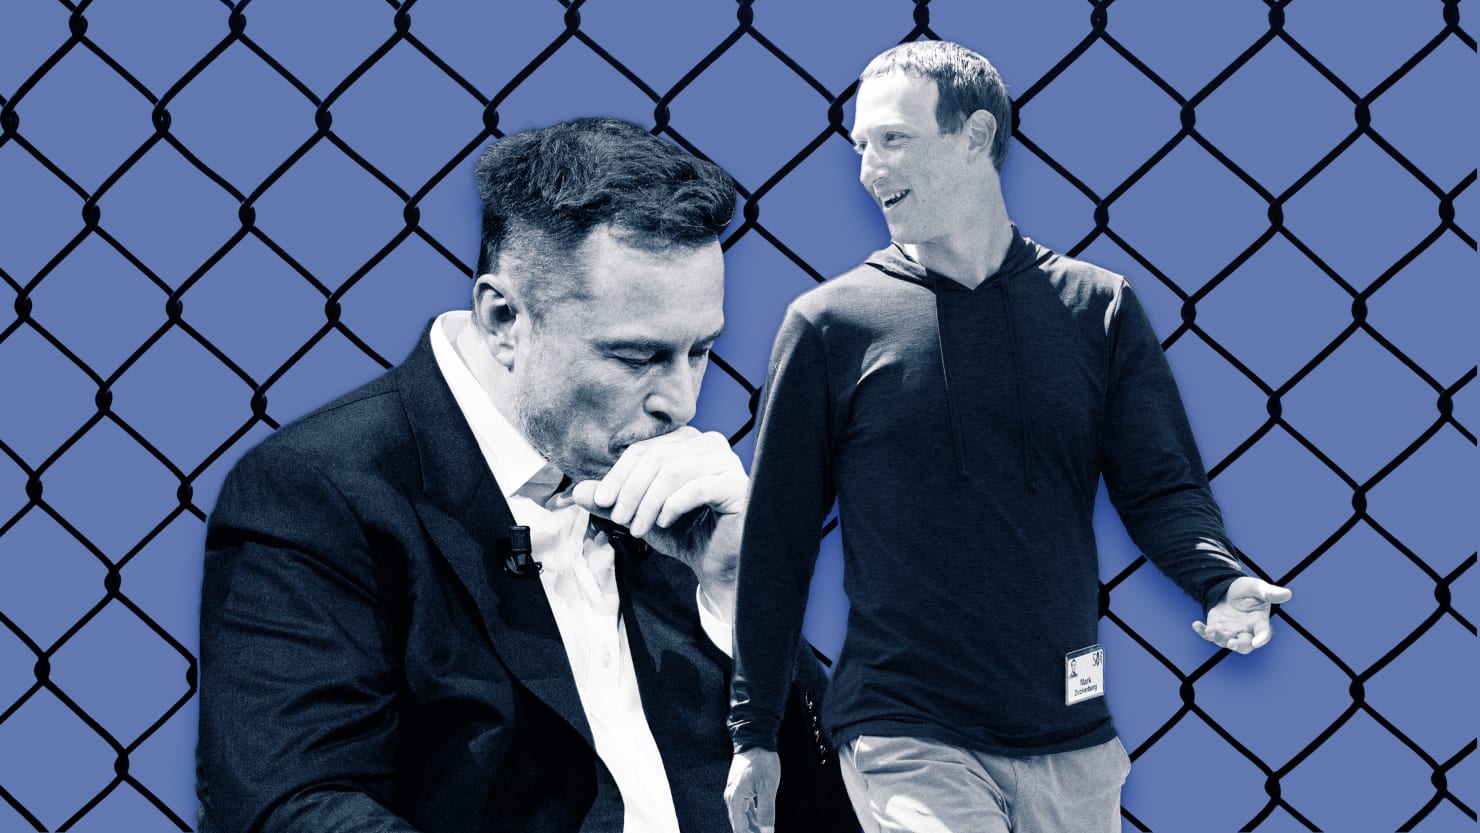 Mark Zuckerberg Calls Out Elon Musk Over Not Replying About Cage Fight Battle Date